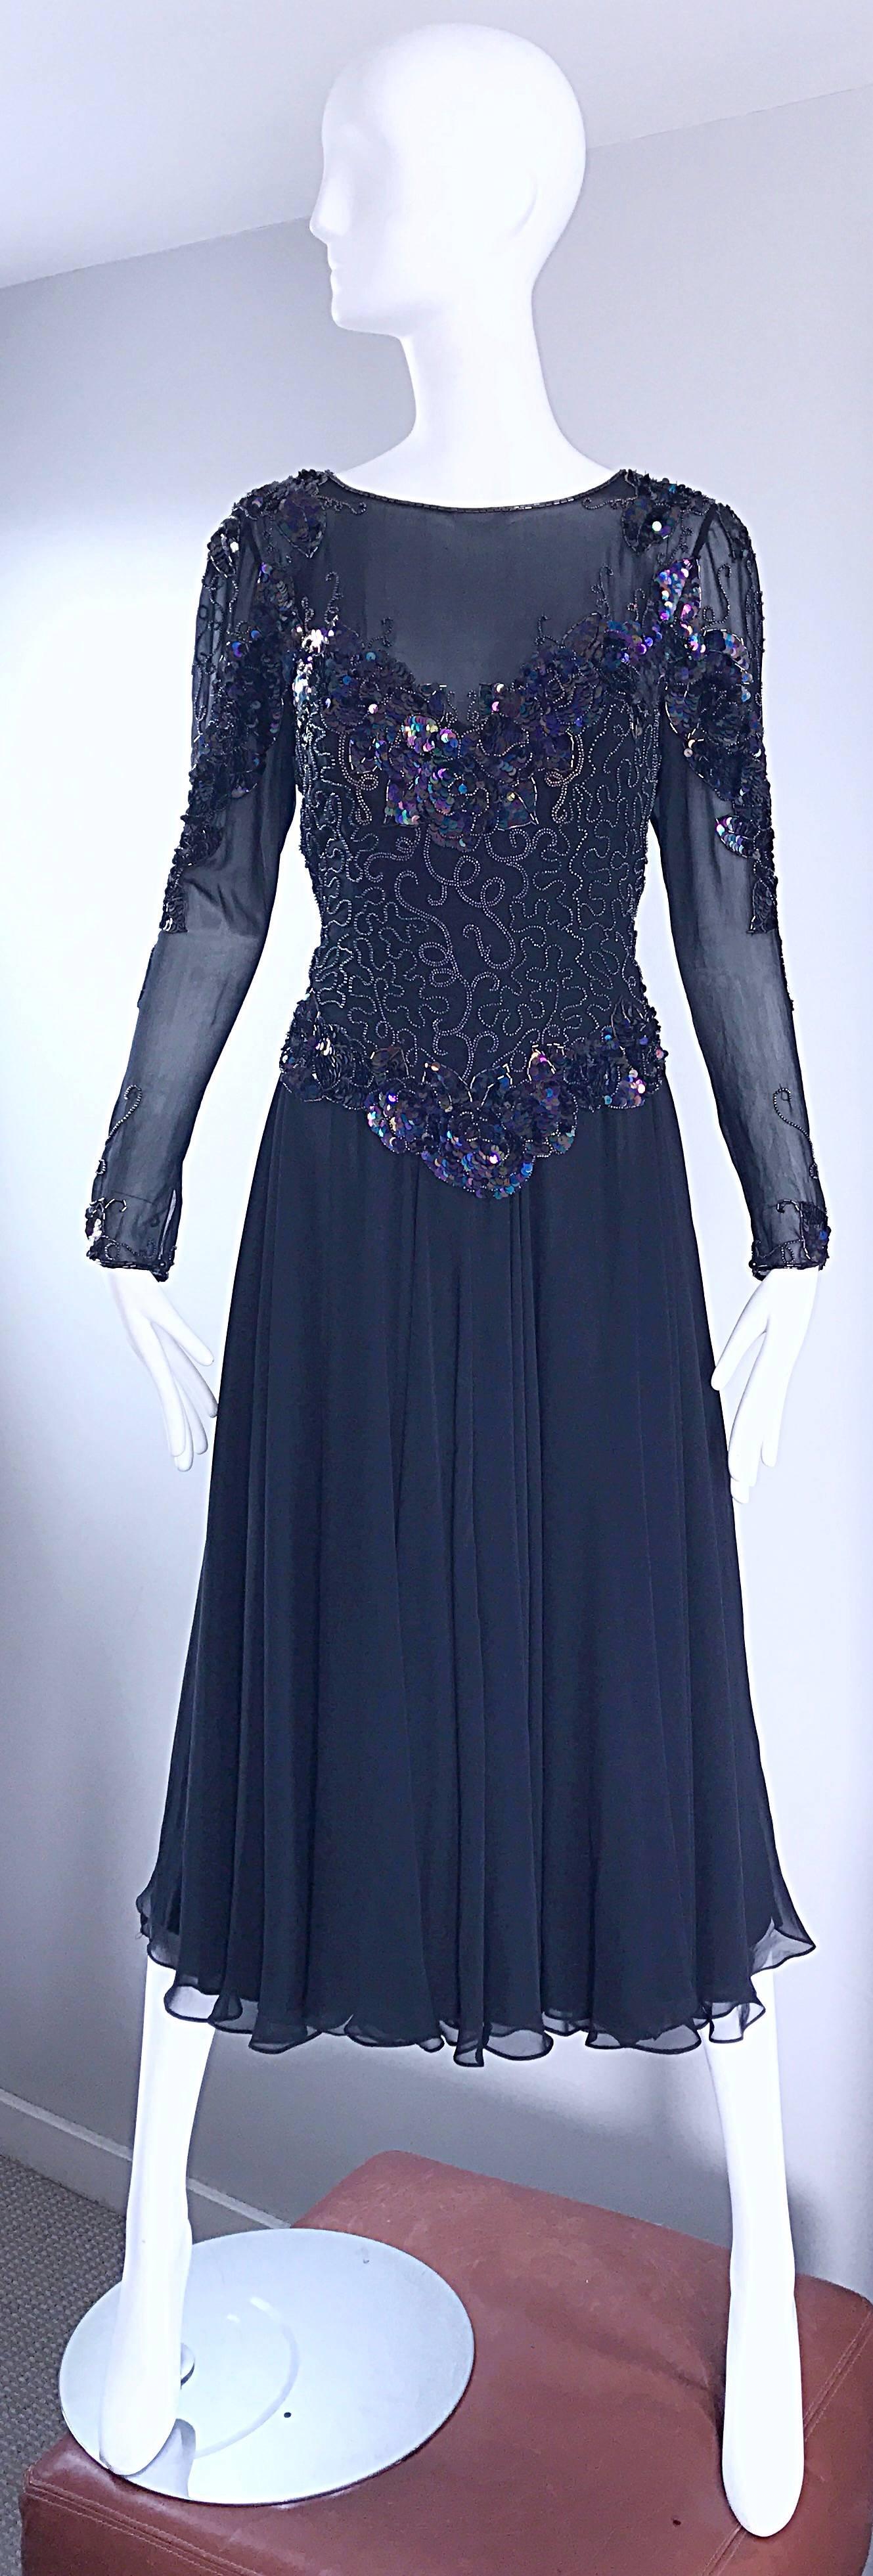 Beautiful vintage early 1980s (1982) ELETRA CASADEI black silk chiffon cocktail dress! Features a strapless bustier dress, with attached chiffon overlay. Thousands of hand-sewn sequins and beads throughout the chiffon overlay and sleeves. Wonderful